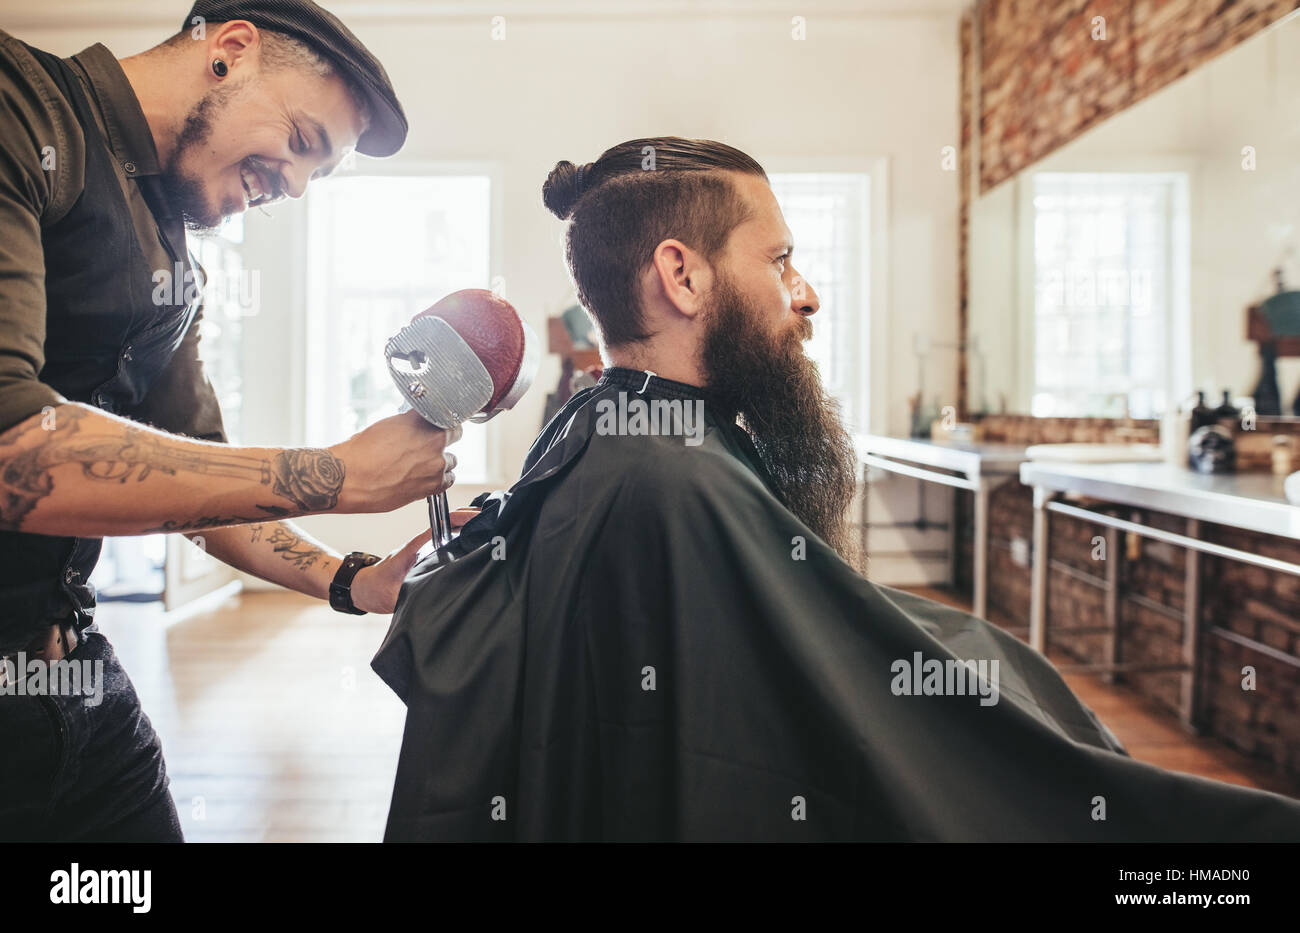 Handsome Bearded Man In A Salon Cape In The Barbershop With Stock